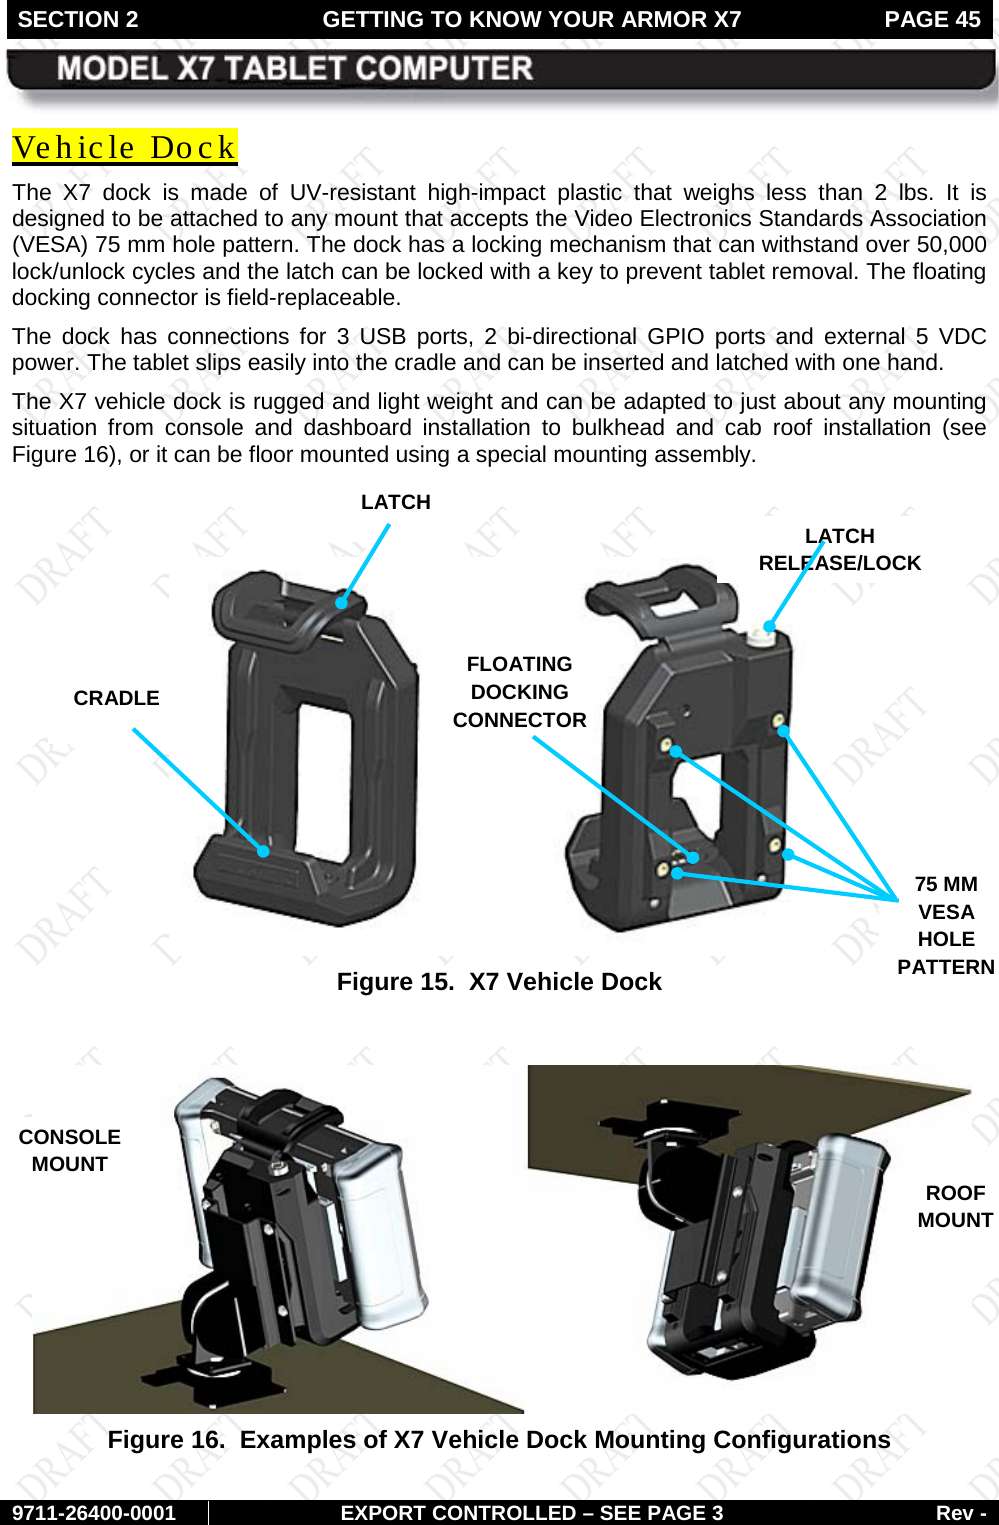 SECTION 2 GETTING TO KNOW YOUR ARMOR X7  PAGE 45        9711-26400-0001 EXPORT CONTROLLED – SEE PAGE 3 Rev - Vehicle Dock The X7 dock is made of UV-resistant high-impact plastic that weighs less than 2 lbs. It is designed to be attached to any mount that accepts the Video Electronics Standards Association (VESA) 75 mm hole pattern. The dock has a locking mechanism that can withstand over 50,000 lock/unlock cycles and the latch can be locked with a key to prevent tablet removal. The floating docking connector is field-replaceable. The dock has connections for 3 USB ports, 2 bi-directional GPIO ports and external 5 VDC power. The tablet slips easily into the cradle and can be inserted and latched with one hand. The X7 vehicle dock is rugged and light weight and can be adapted to just about any mounting situation from console and dashboard installation to bulkhead and cab roof installation (see Figure 16), or it can be floor mounted using a special mounting assembly.    Figure 15.  X7 Vehicle Dock   Figure 16.  Examples of X7 Vehicle Dock Mounting Configurations   LATCH LATCH  RELEASE/LOCK 75 MM VESA HOLE PATTERN CRADLE FLOATING  DOCKING CONNECTOR CONSOLE MOUNT ROOF MOUNT FINGERPRINT SENSOR (FPS) 